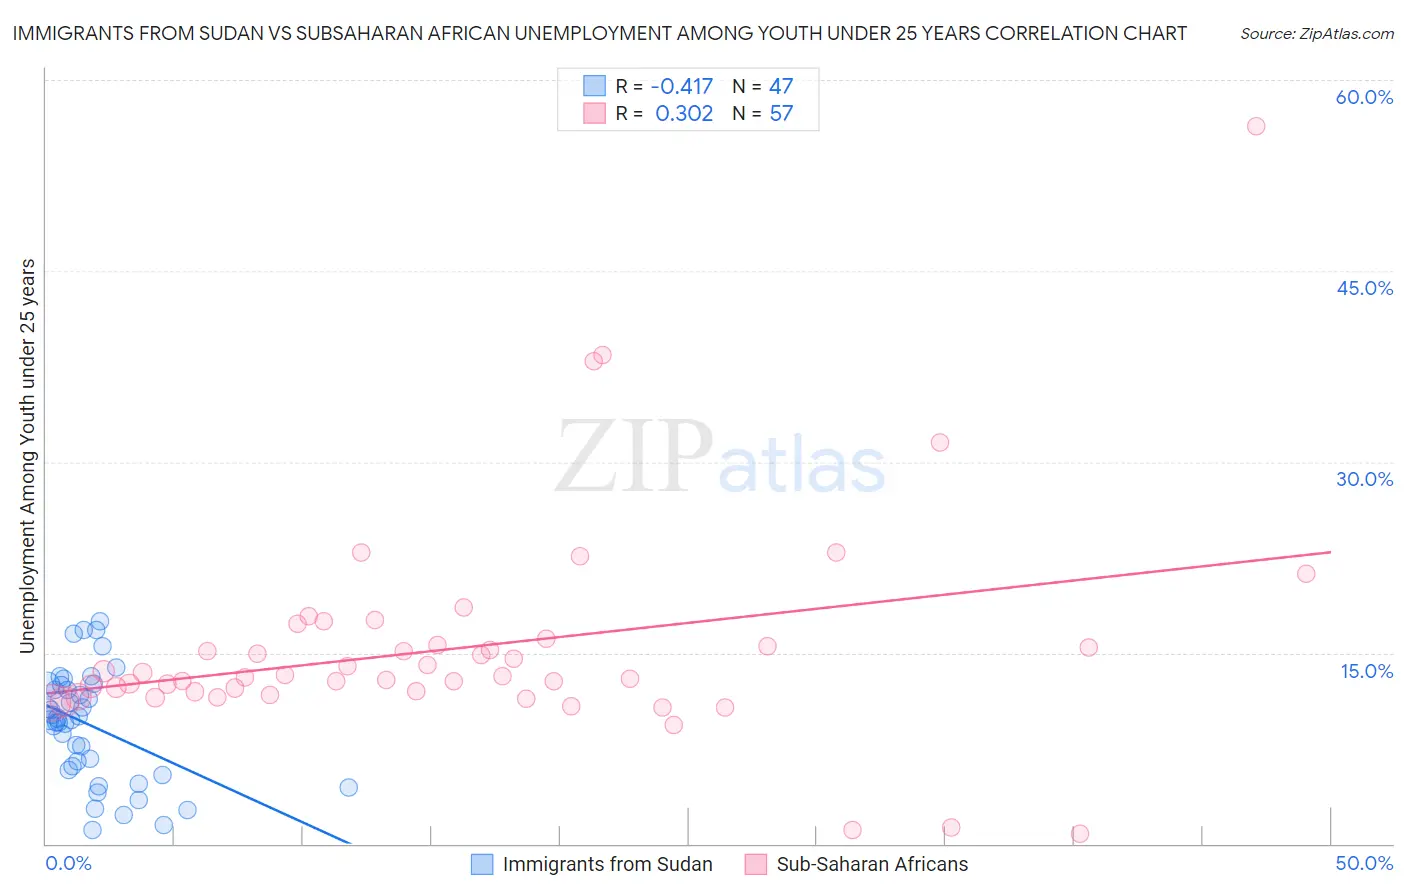 Immigrants from Sudan vs Subsaharan African Unemployment Among Youth under 25 years